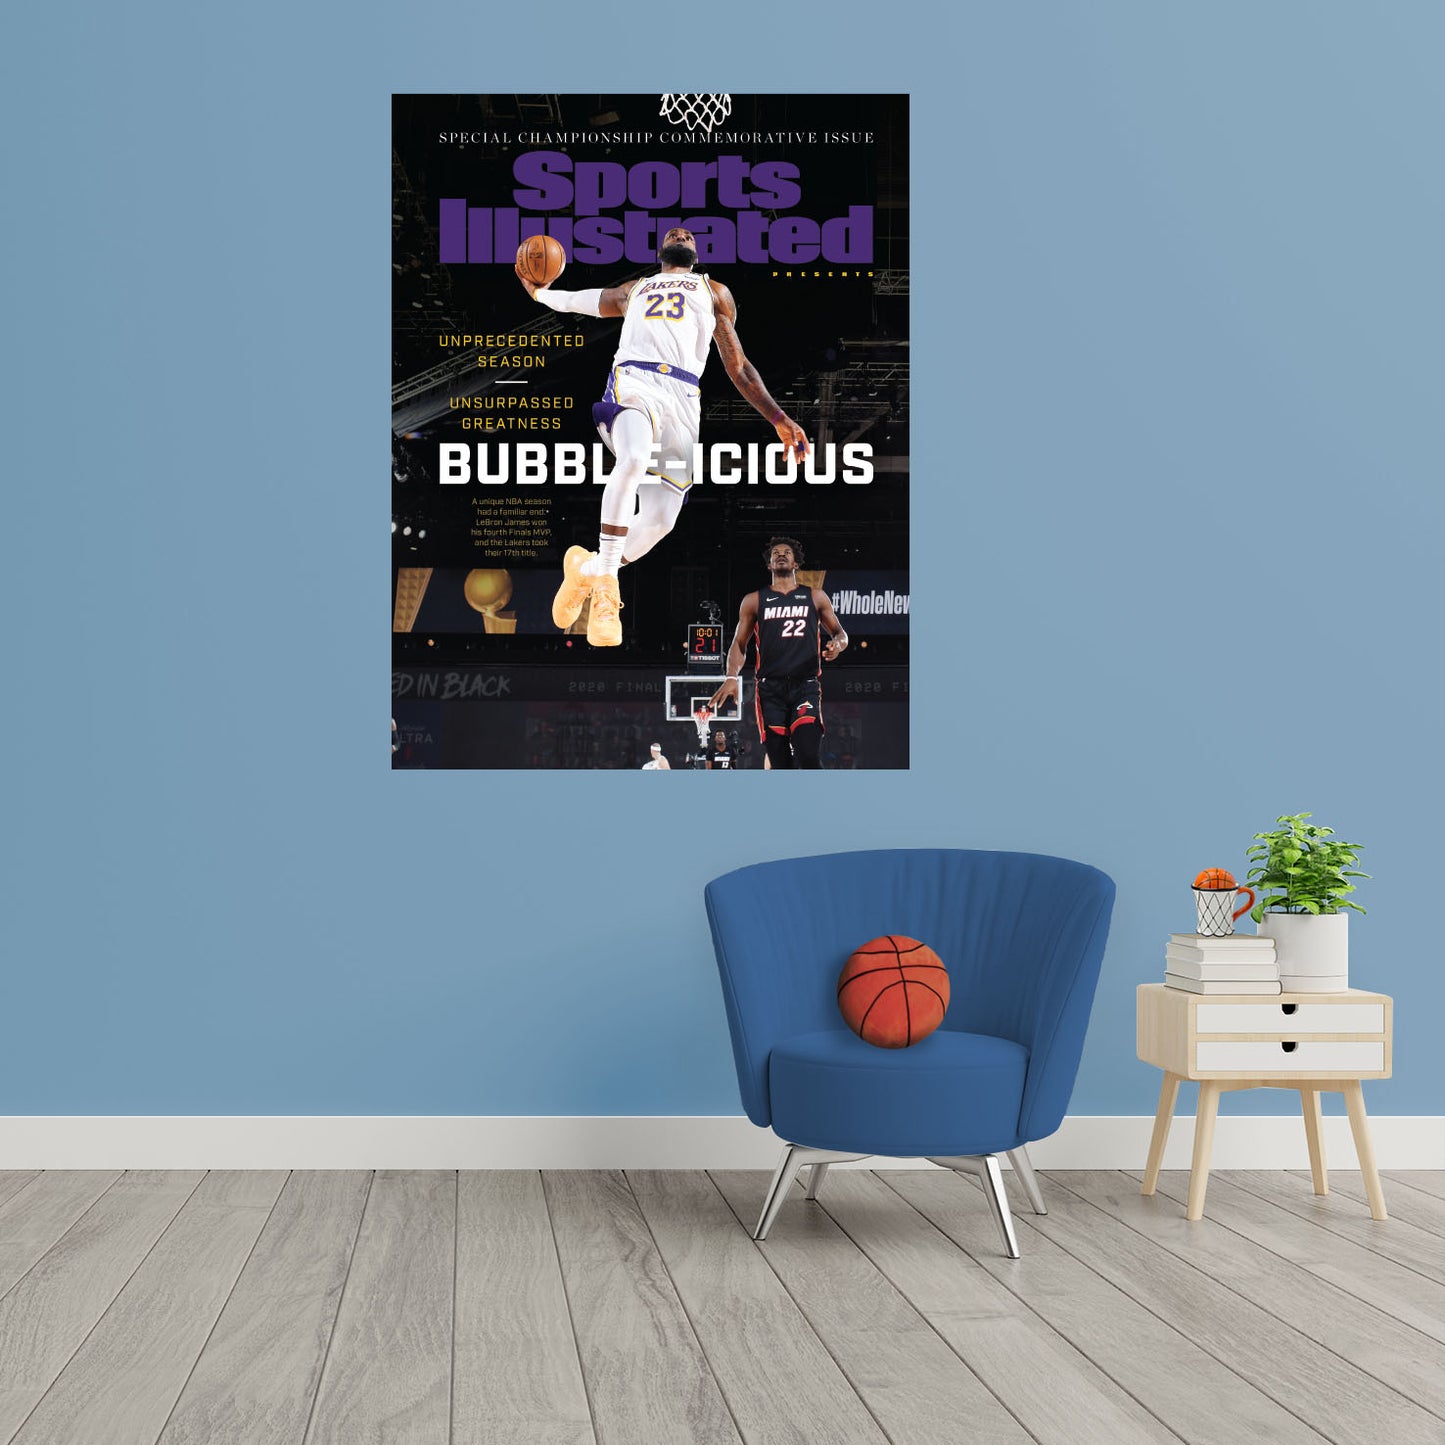 Ncaa Basketball Tournament - Final Four - Semifinals Sports Illustrated  Cover Wood Print by Sports Illustrated - Sports Illustrated Covers